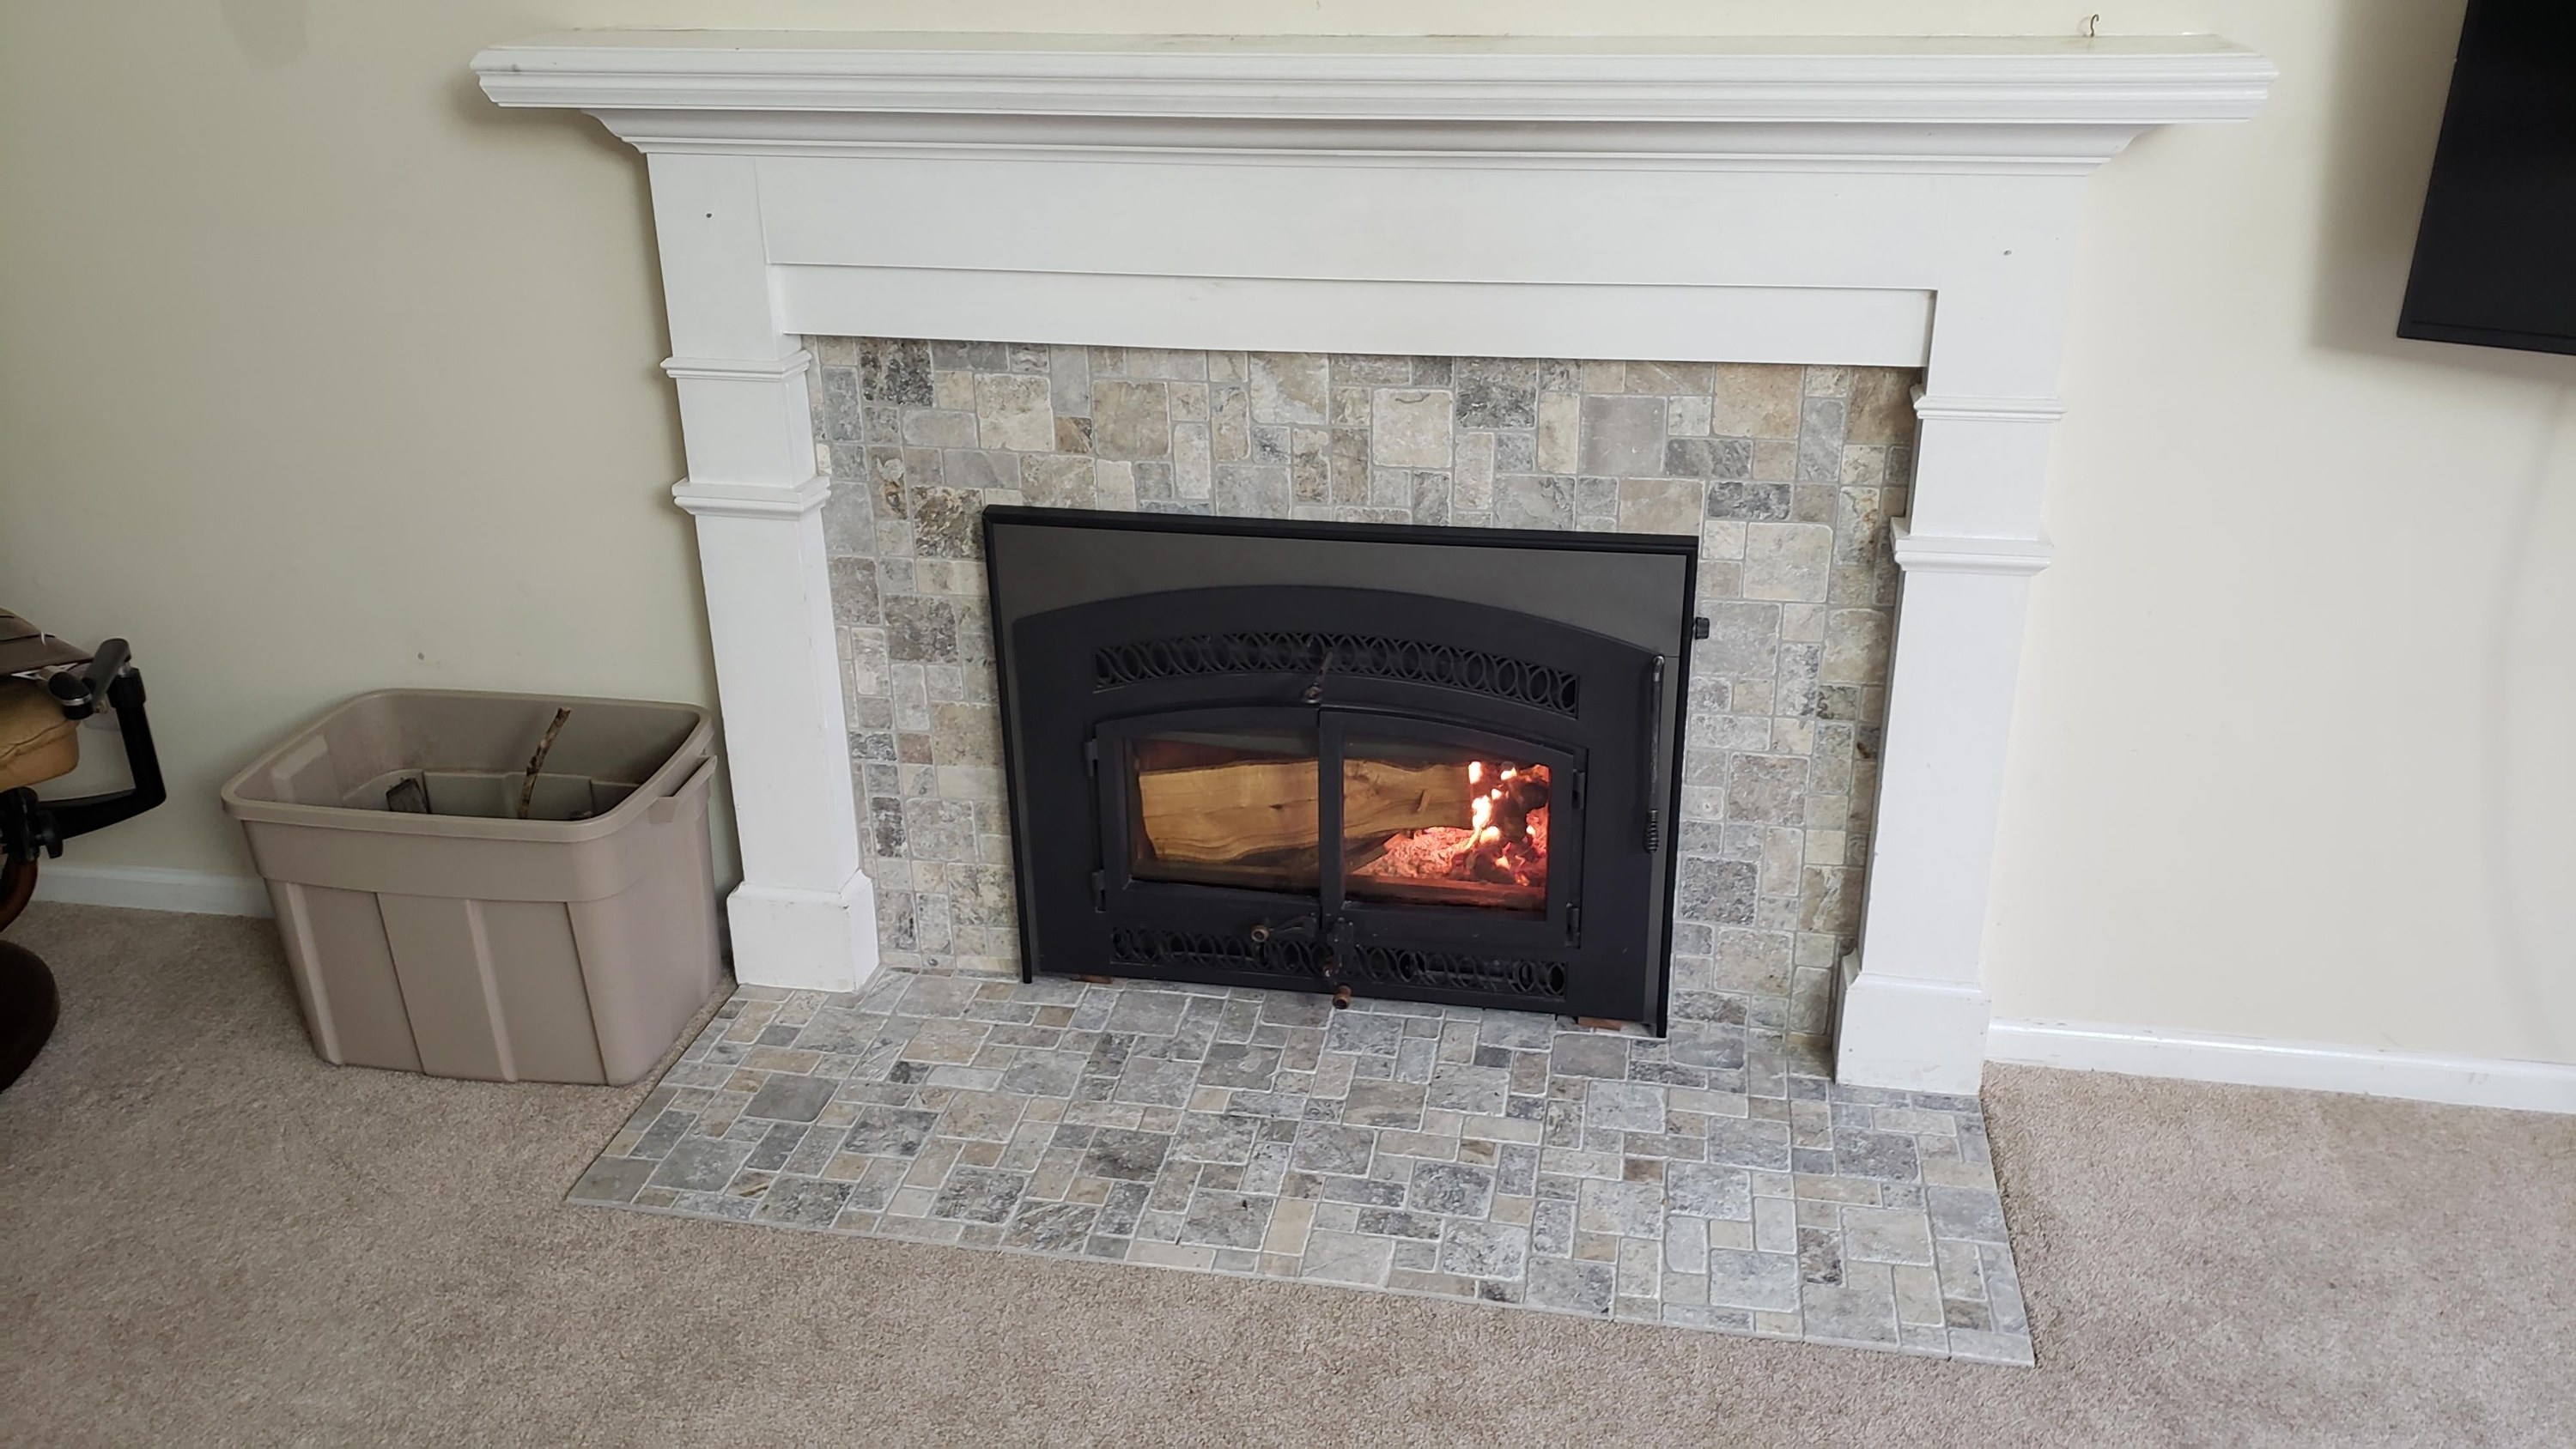 refurbished fireplace with fresh white paint and new tile surround